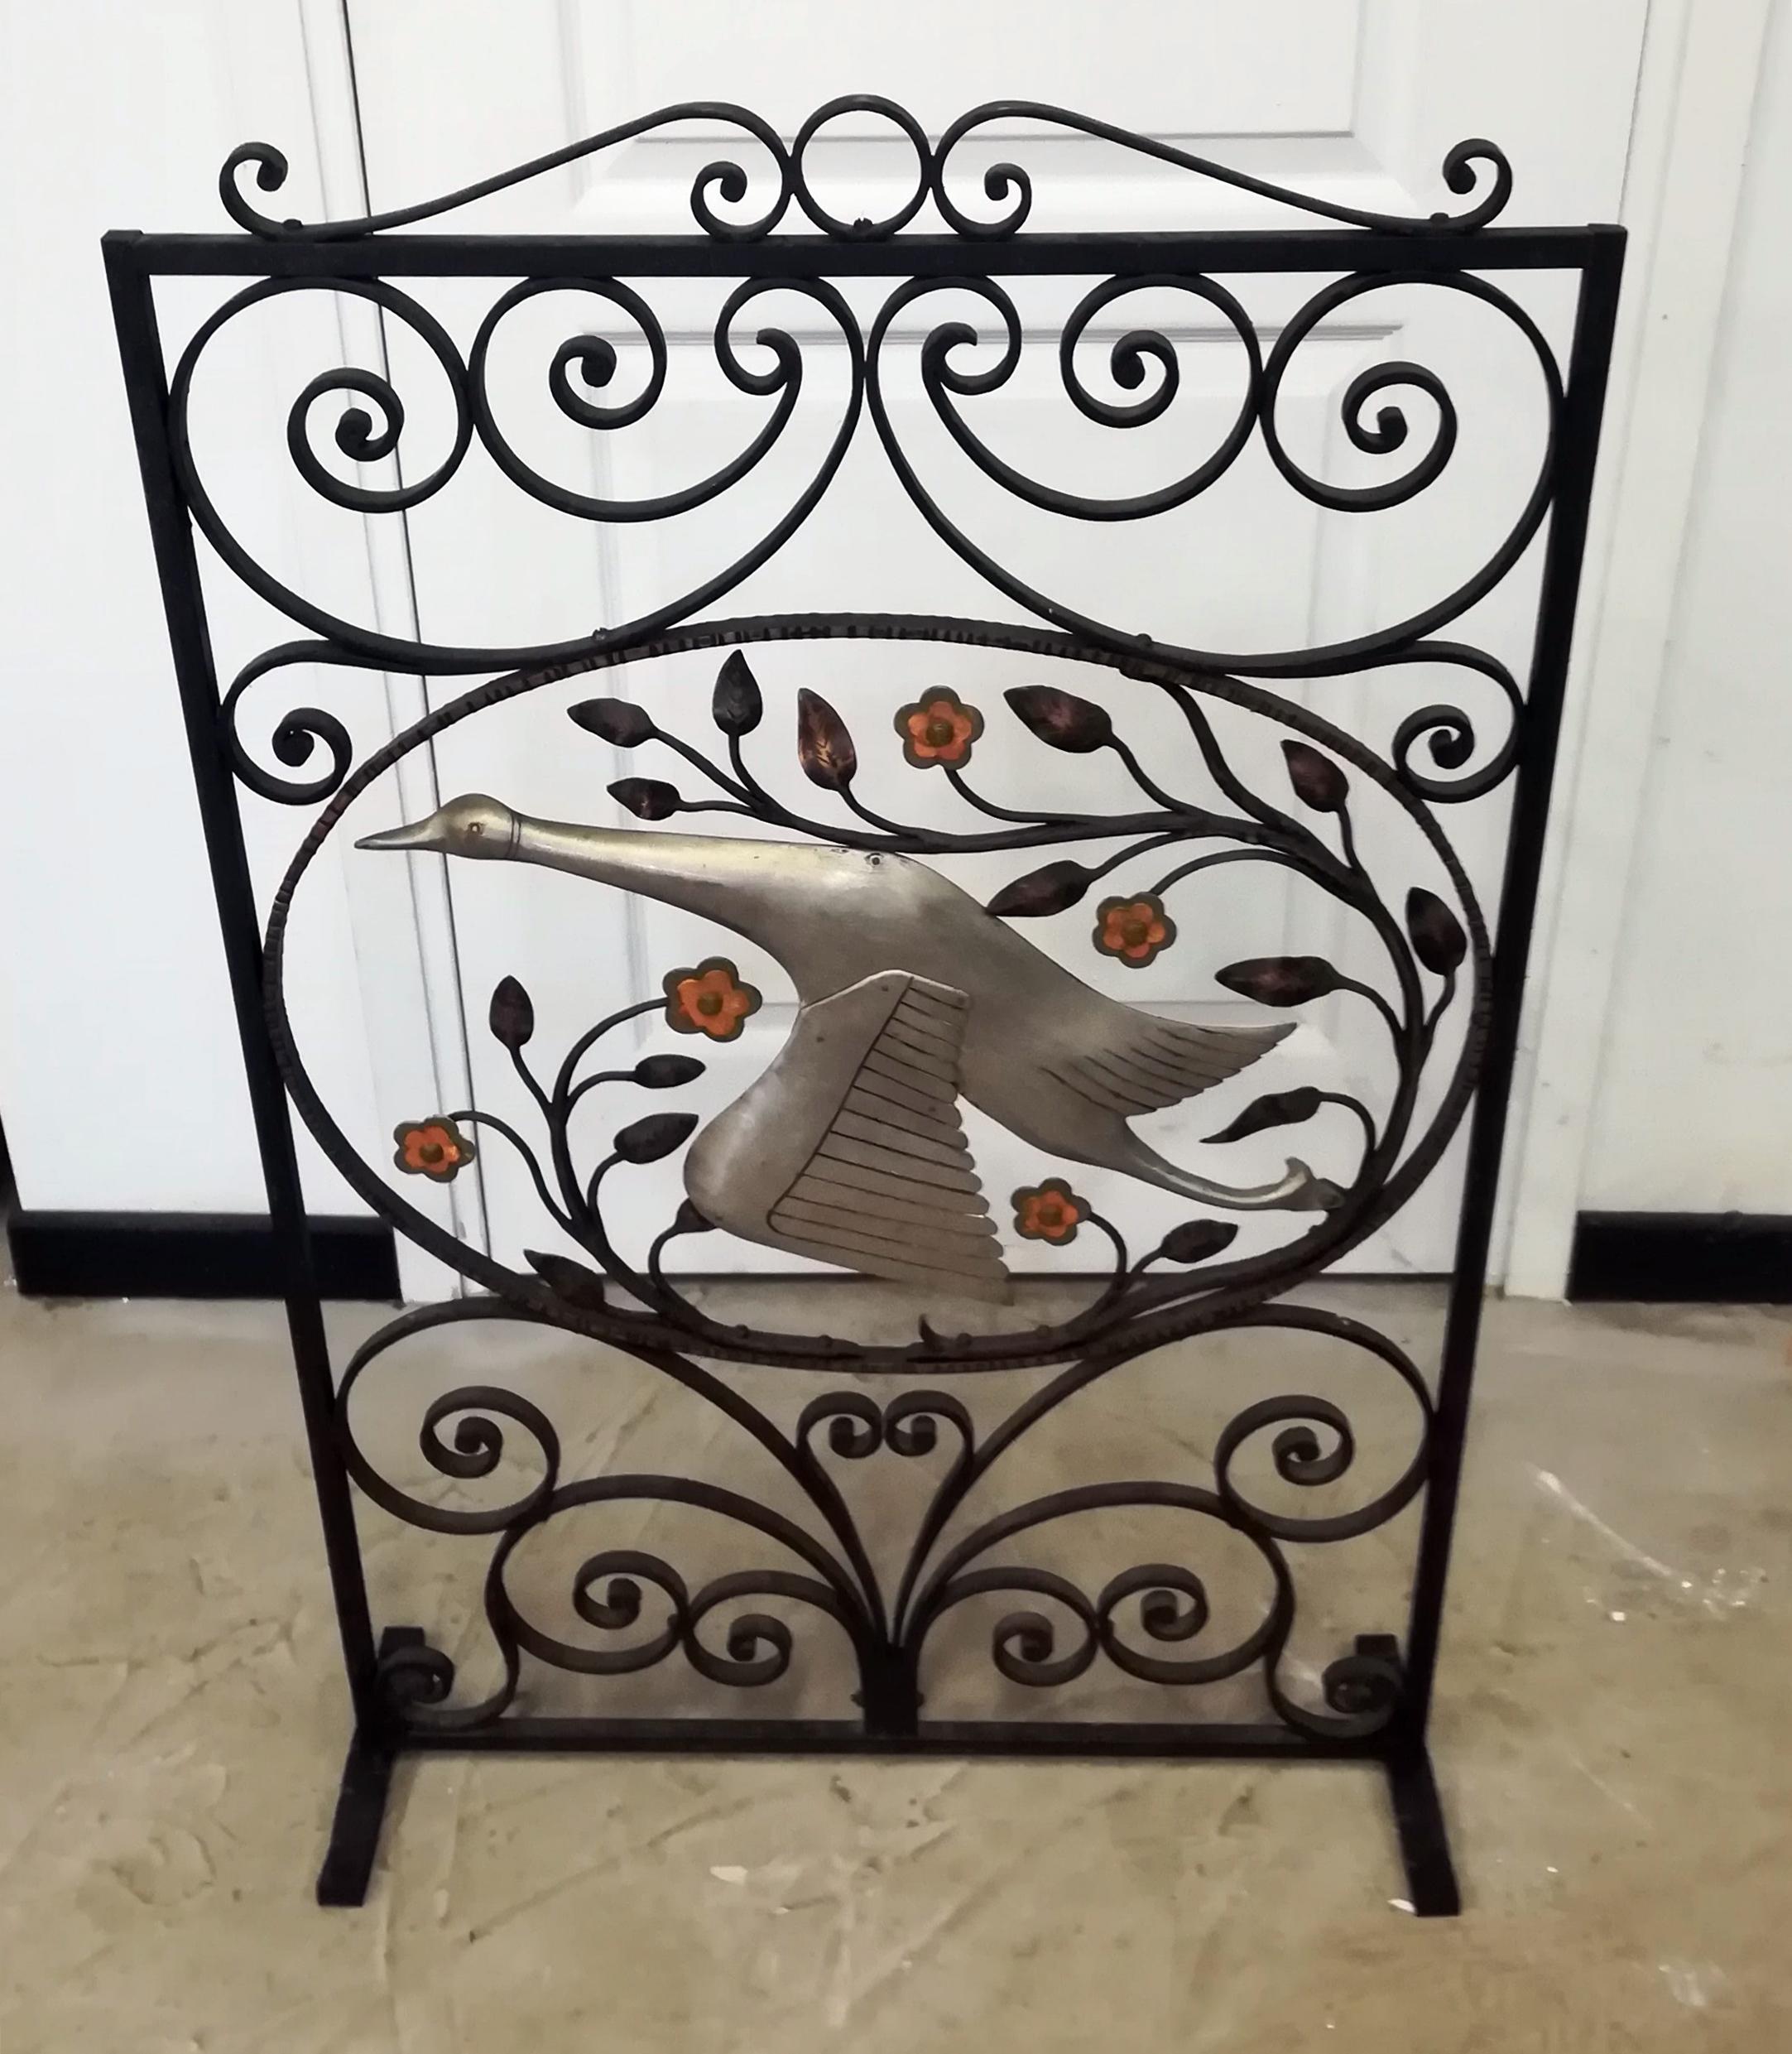 Art Deco wrought iron fire screen, with silver bird (goose)
Measures: Thickness 1.5cm.